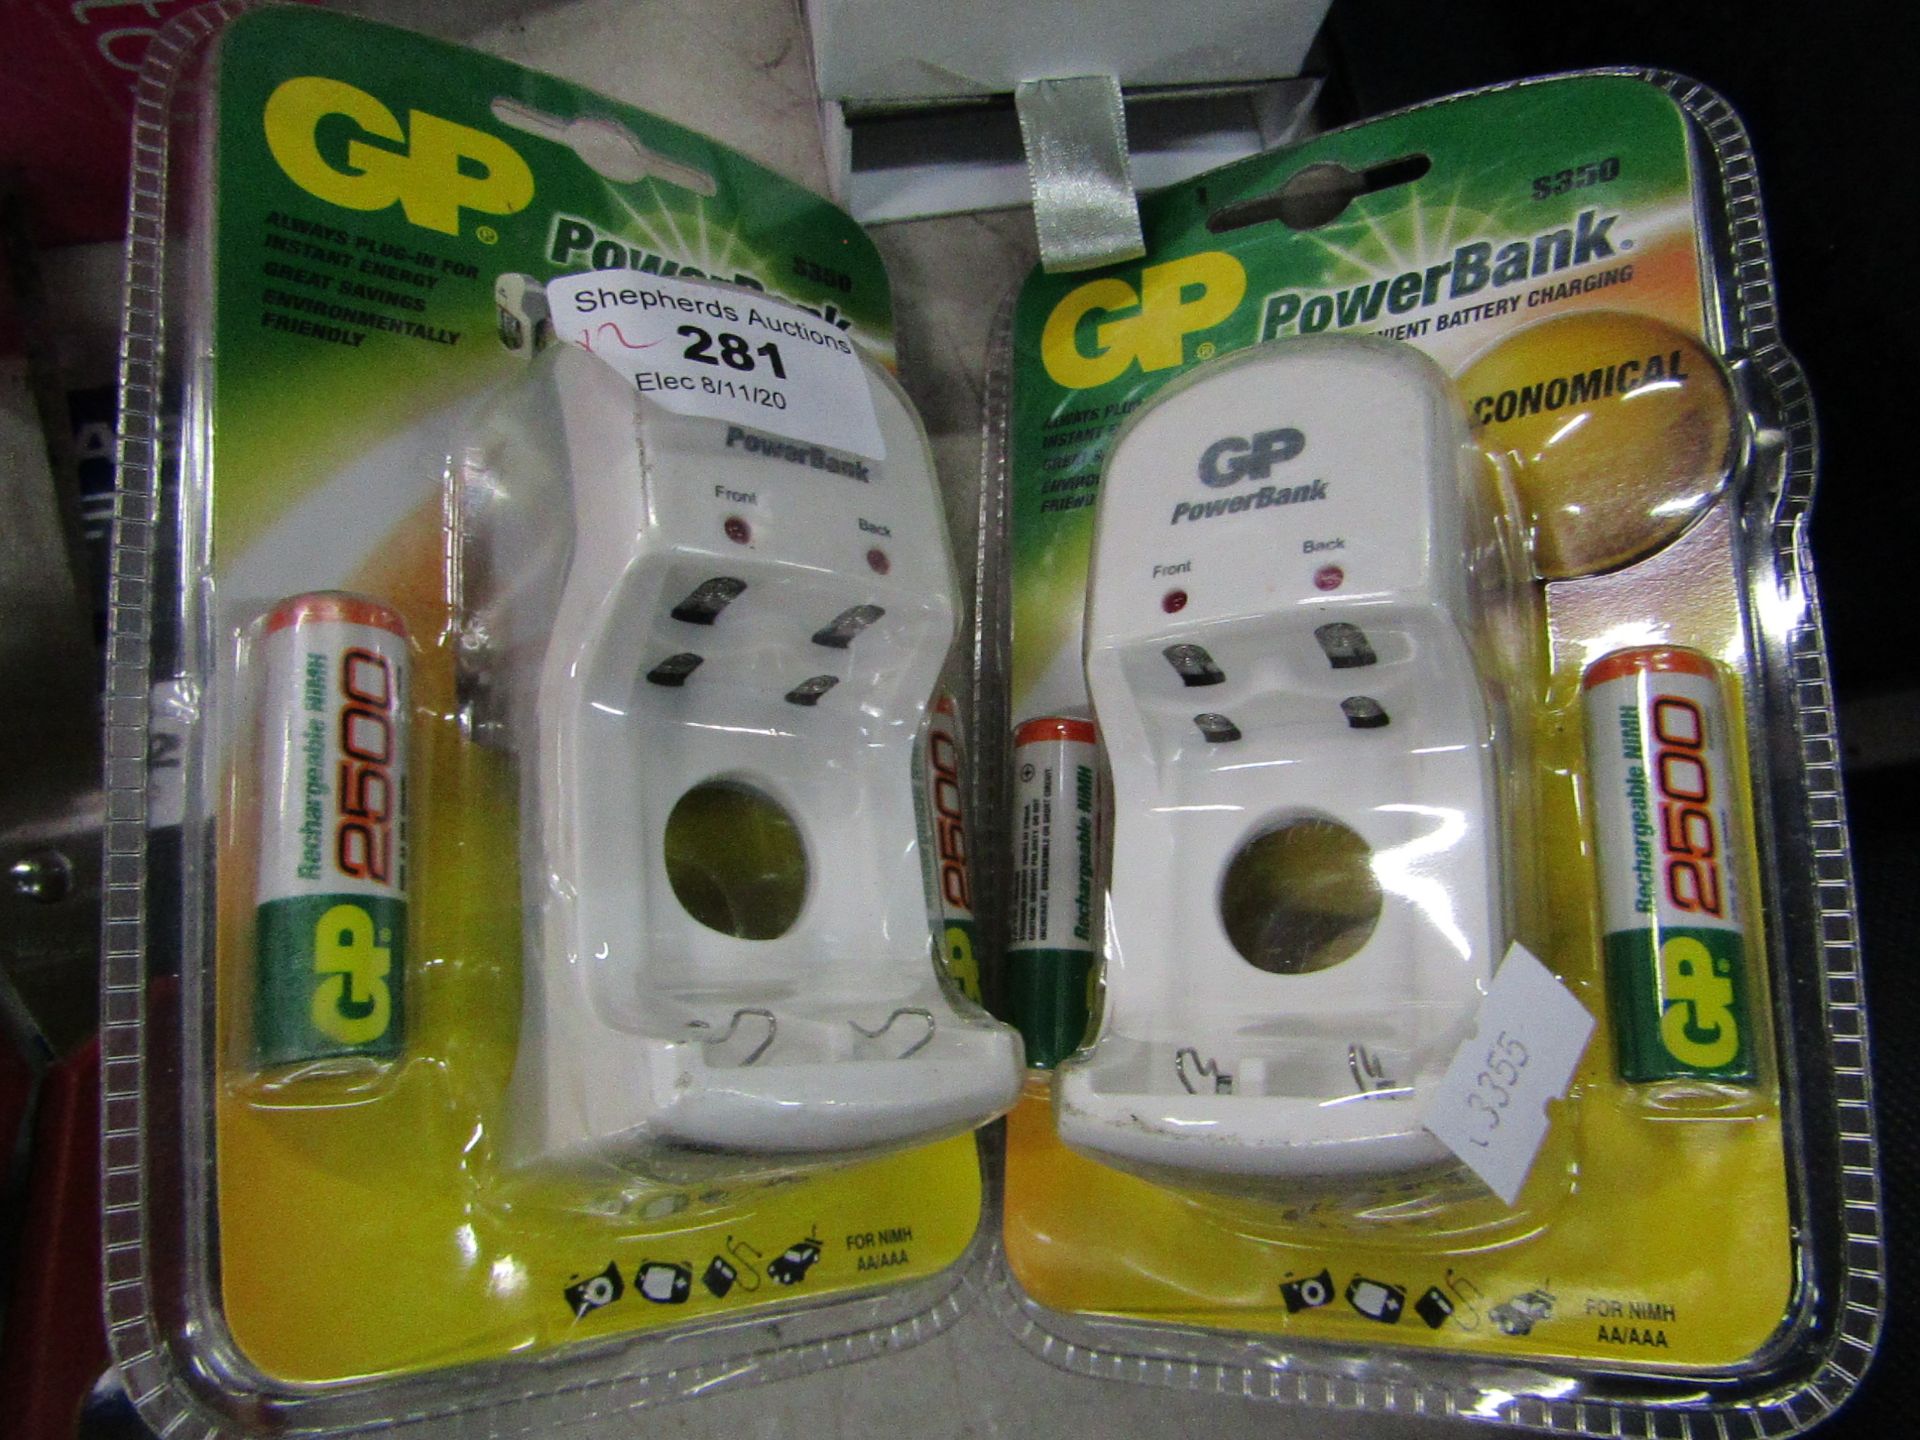 2x GP AA battery chargers with 2 AA rechargable batteries, still sealed